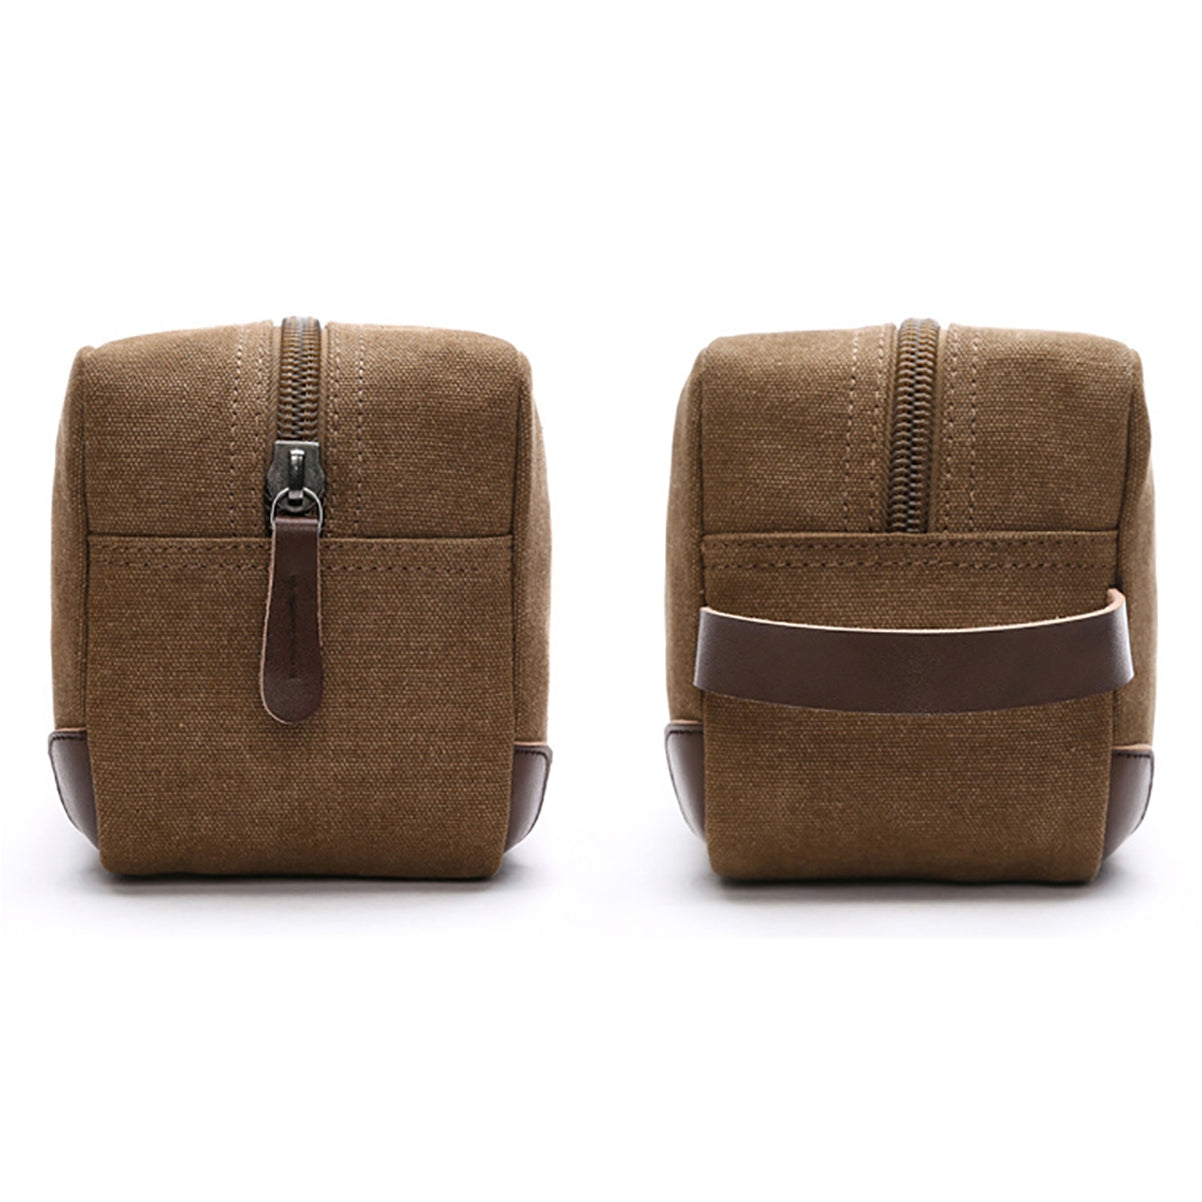 men's canvas and leather toiletry bag